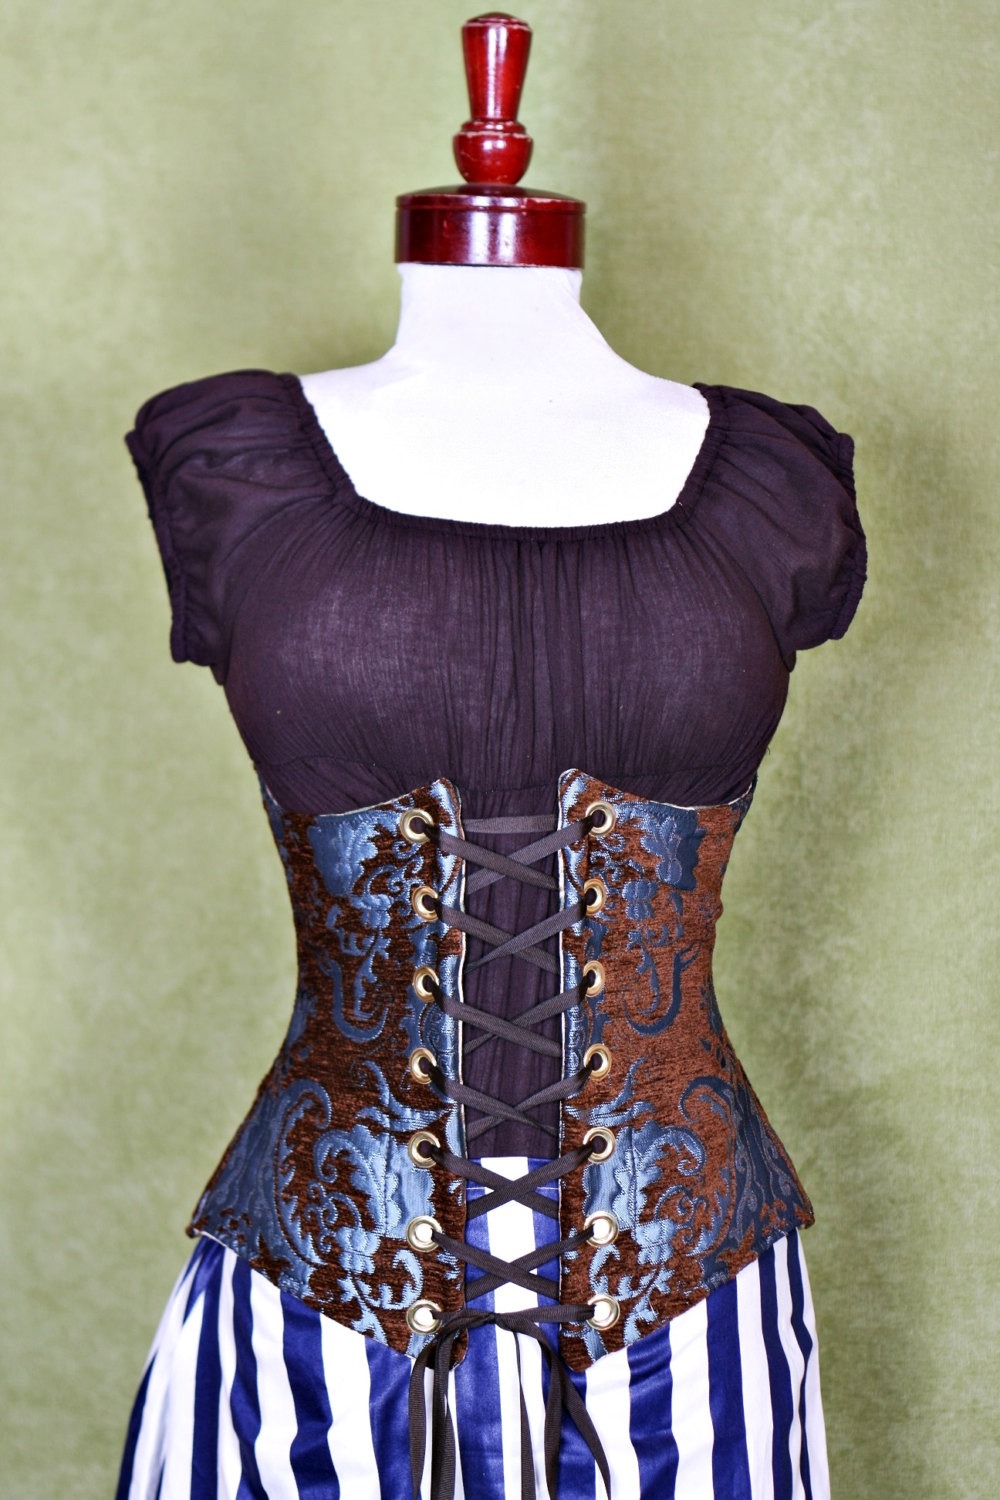 Waist 39 to 41 Chocolate & Teal Medallion Wench Corset steampunk buy now online